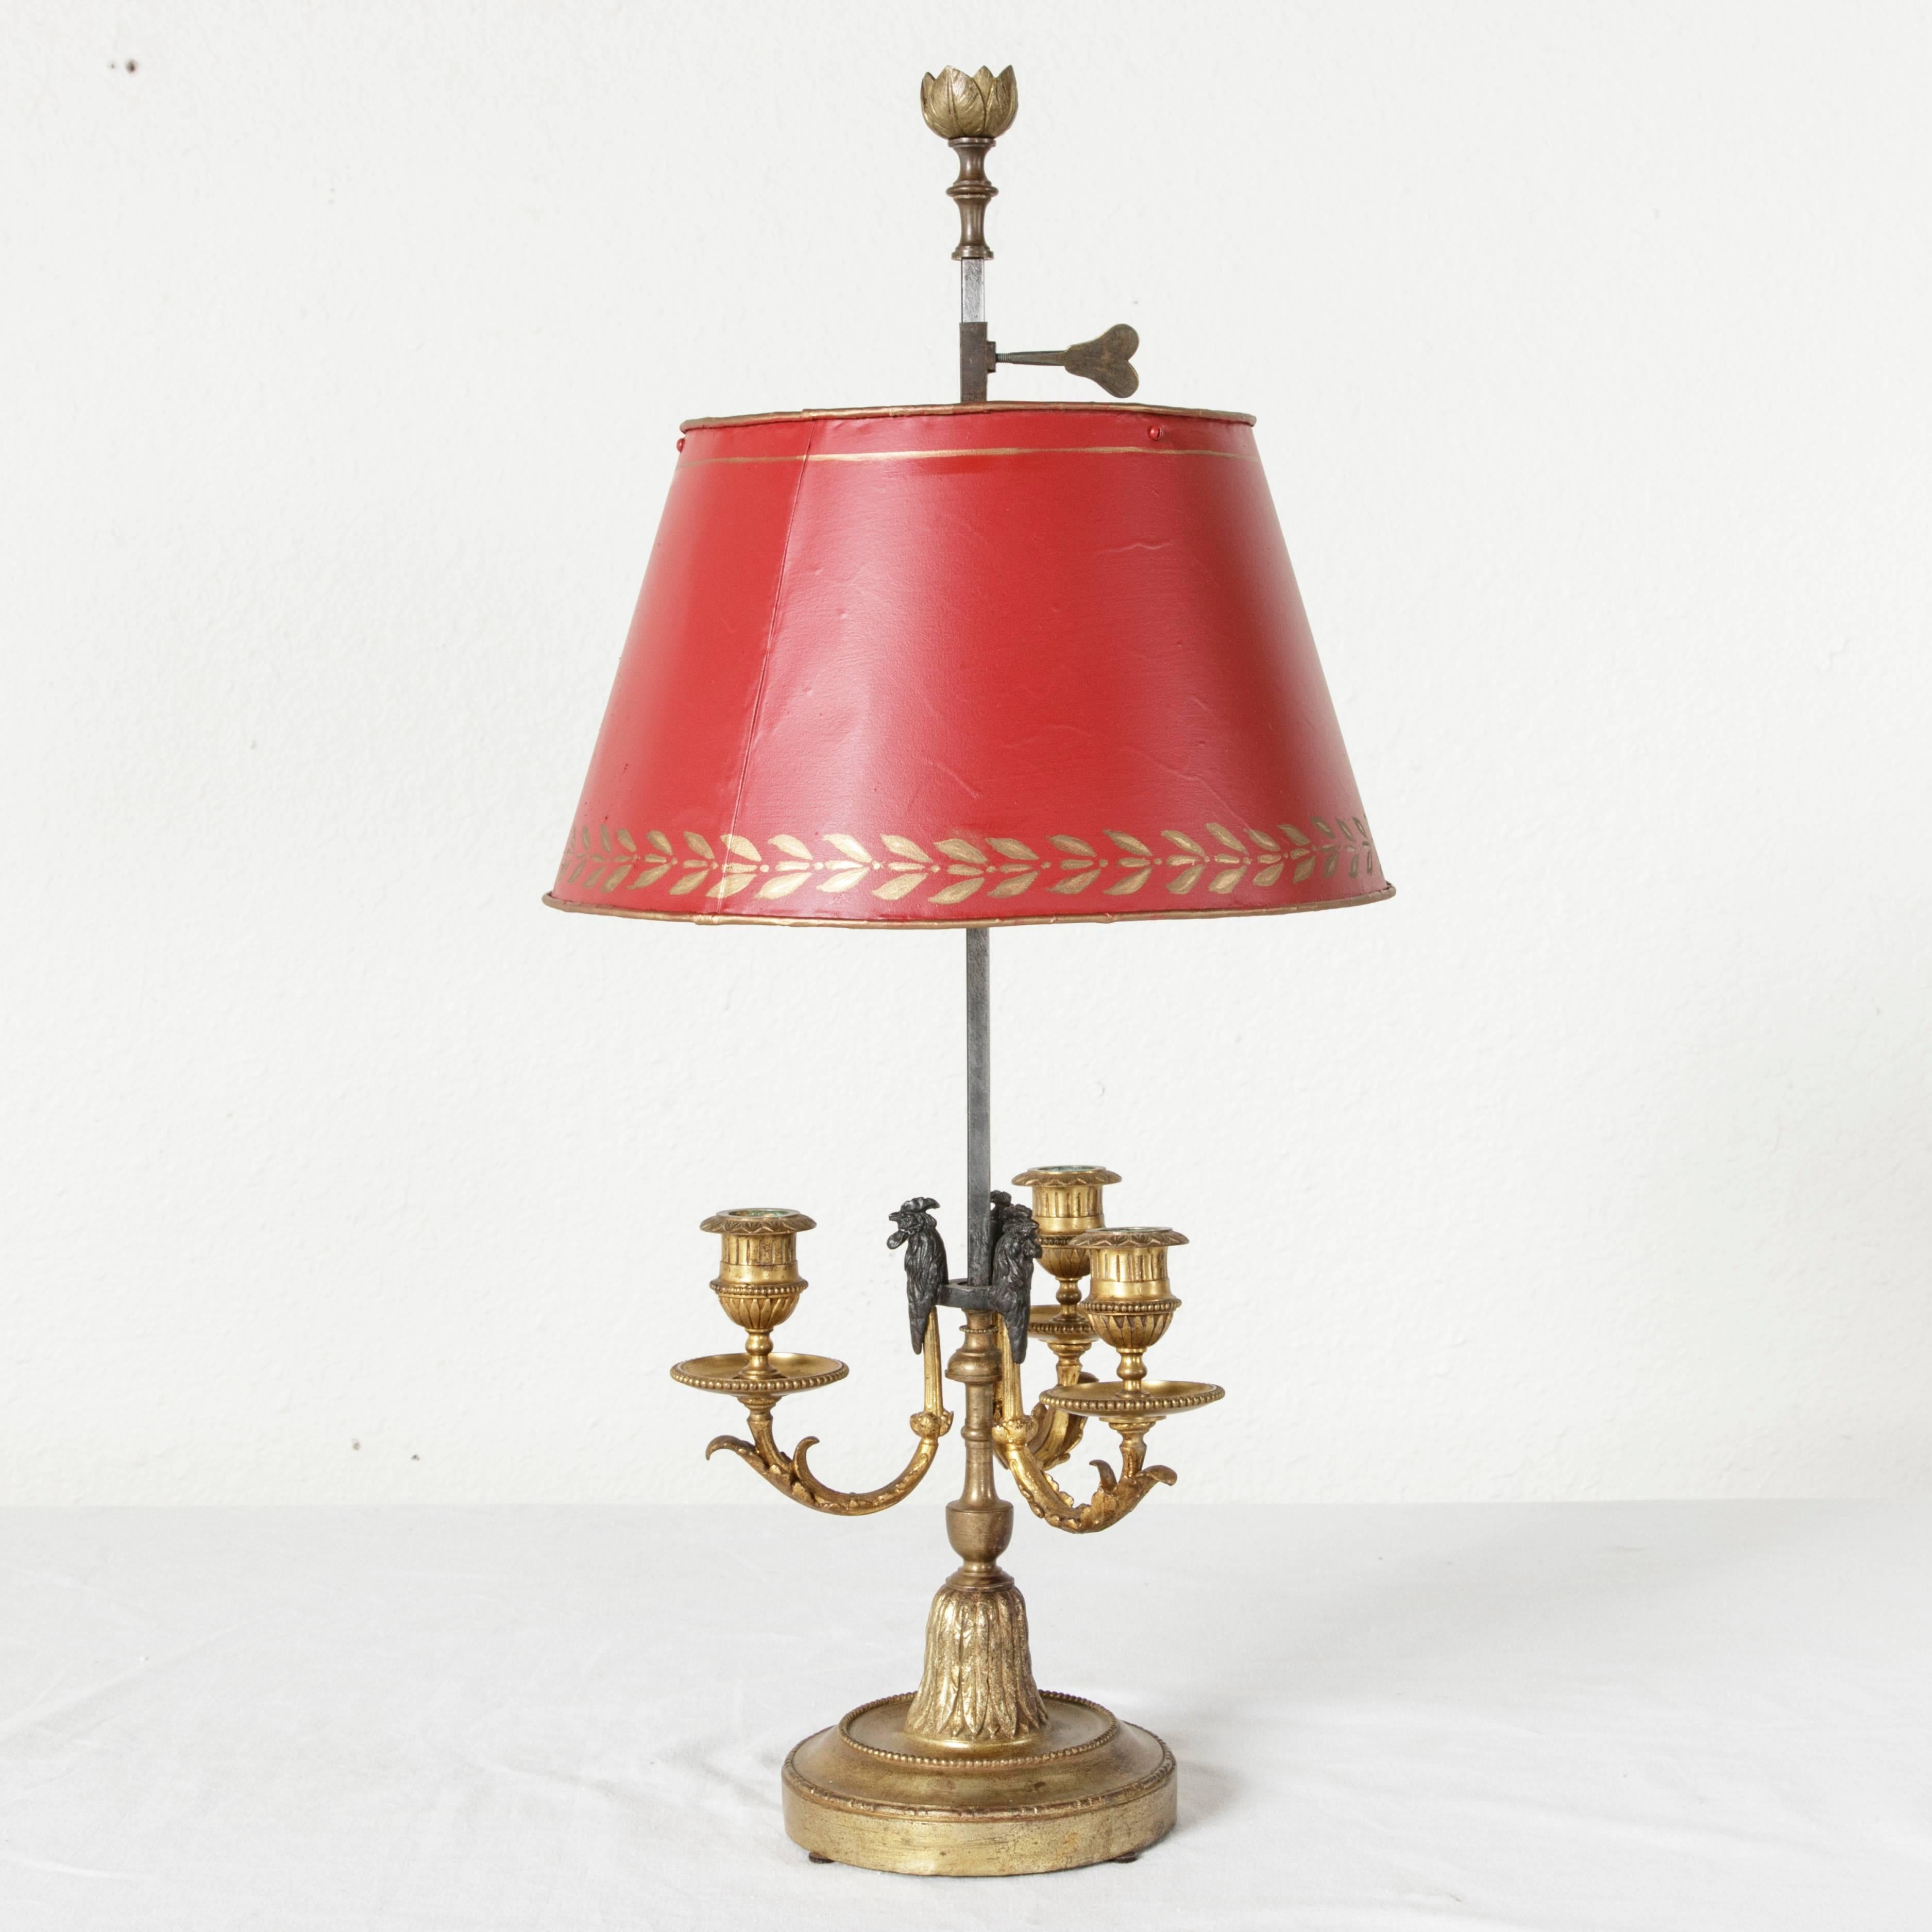 Louis XVI 18th Century French Bouillotte Lamp with Roosters, Red Shade and Gilt Bronze